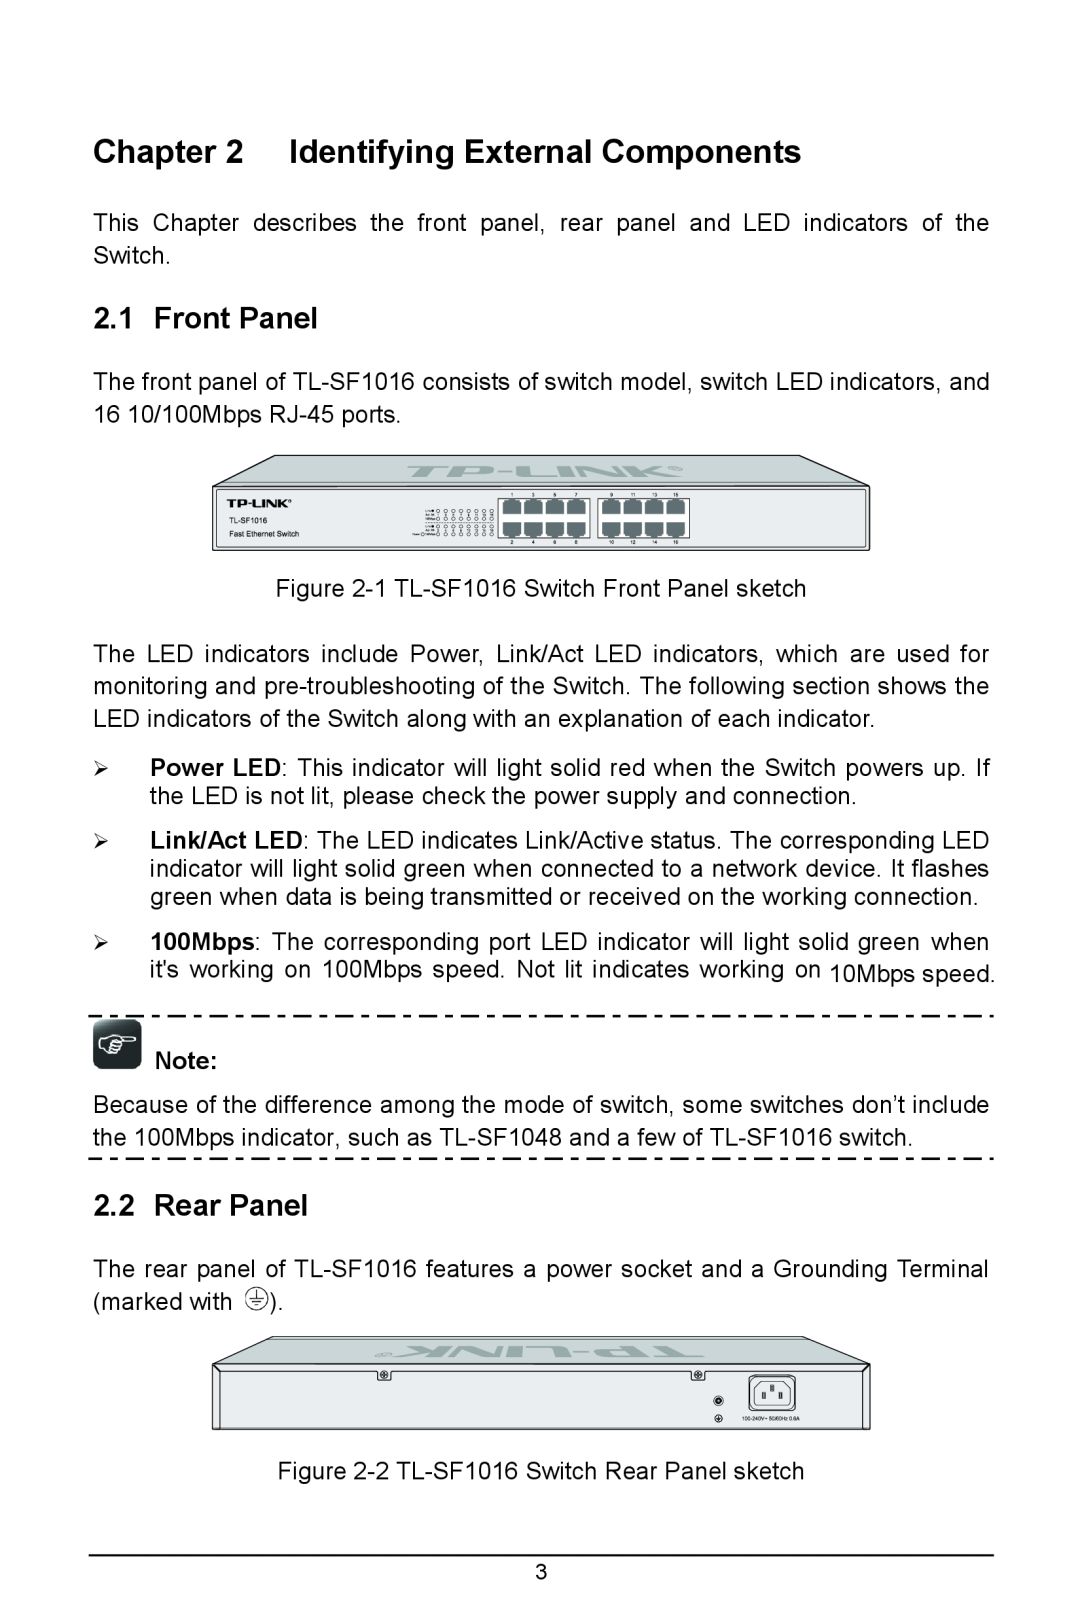 TP-Link TL-SF1024D, TL-SF1048, TL-SF1016DS manual Identifying External Components, Front Panel, Rear Panel 